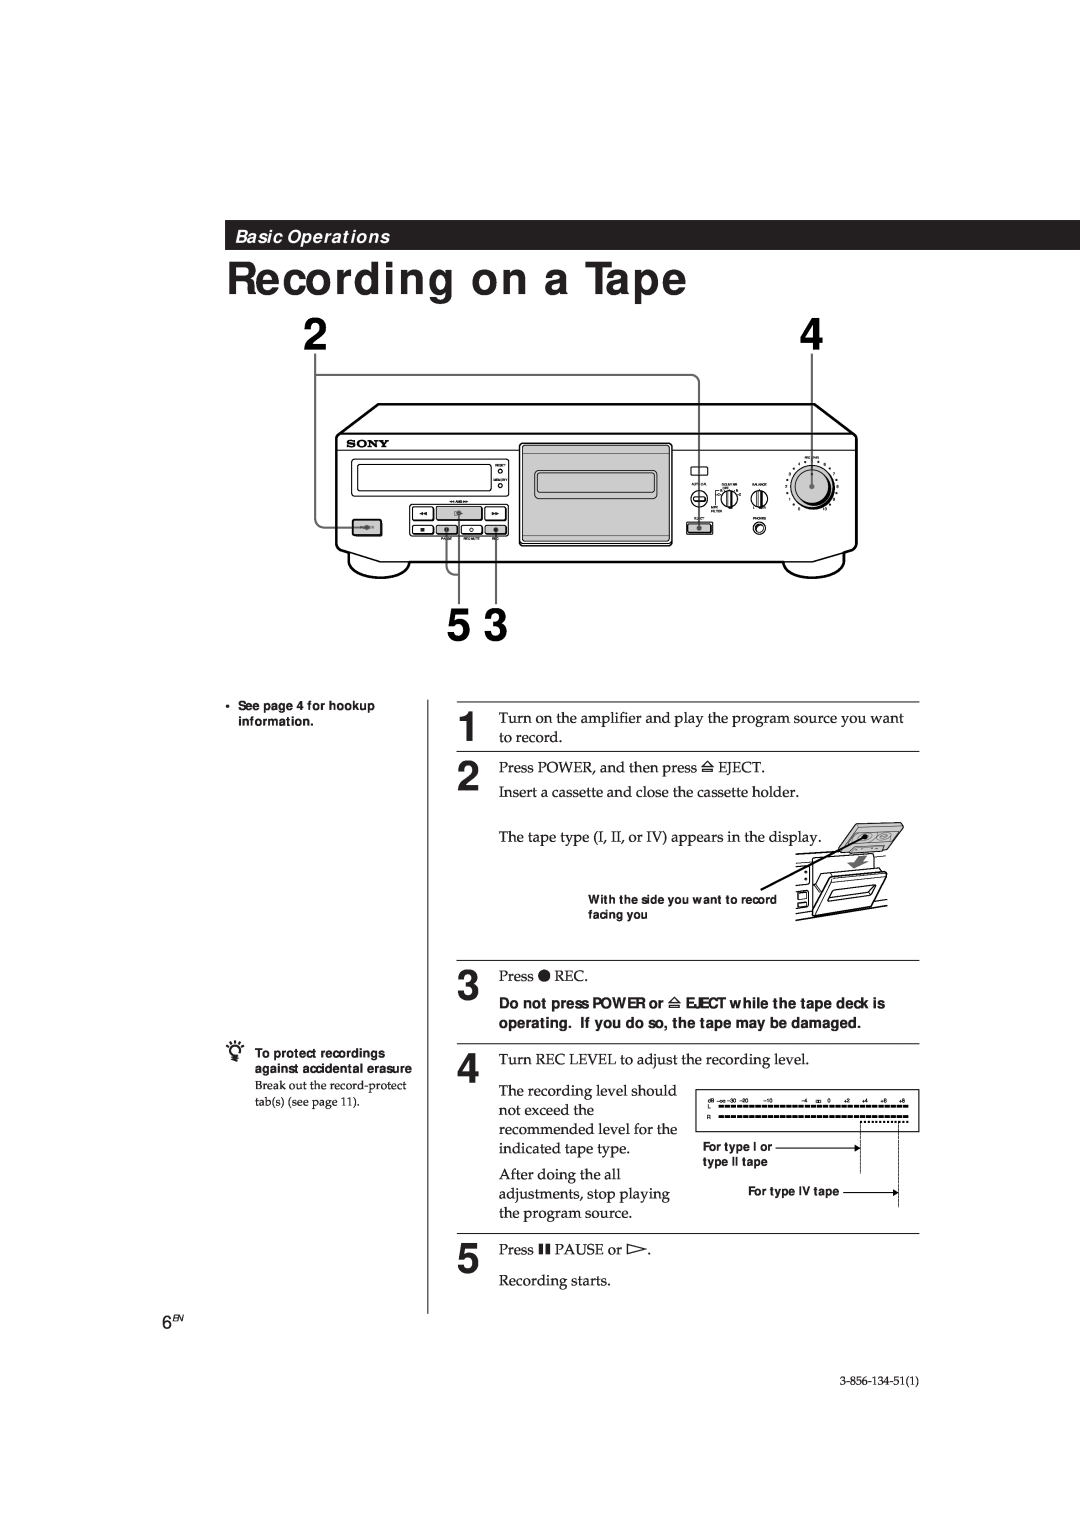 Sony TC-KE300 Recording on a Tape, Press r REC, operating. If you do so, the tape may be damaged, Basic Operations 